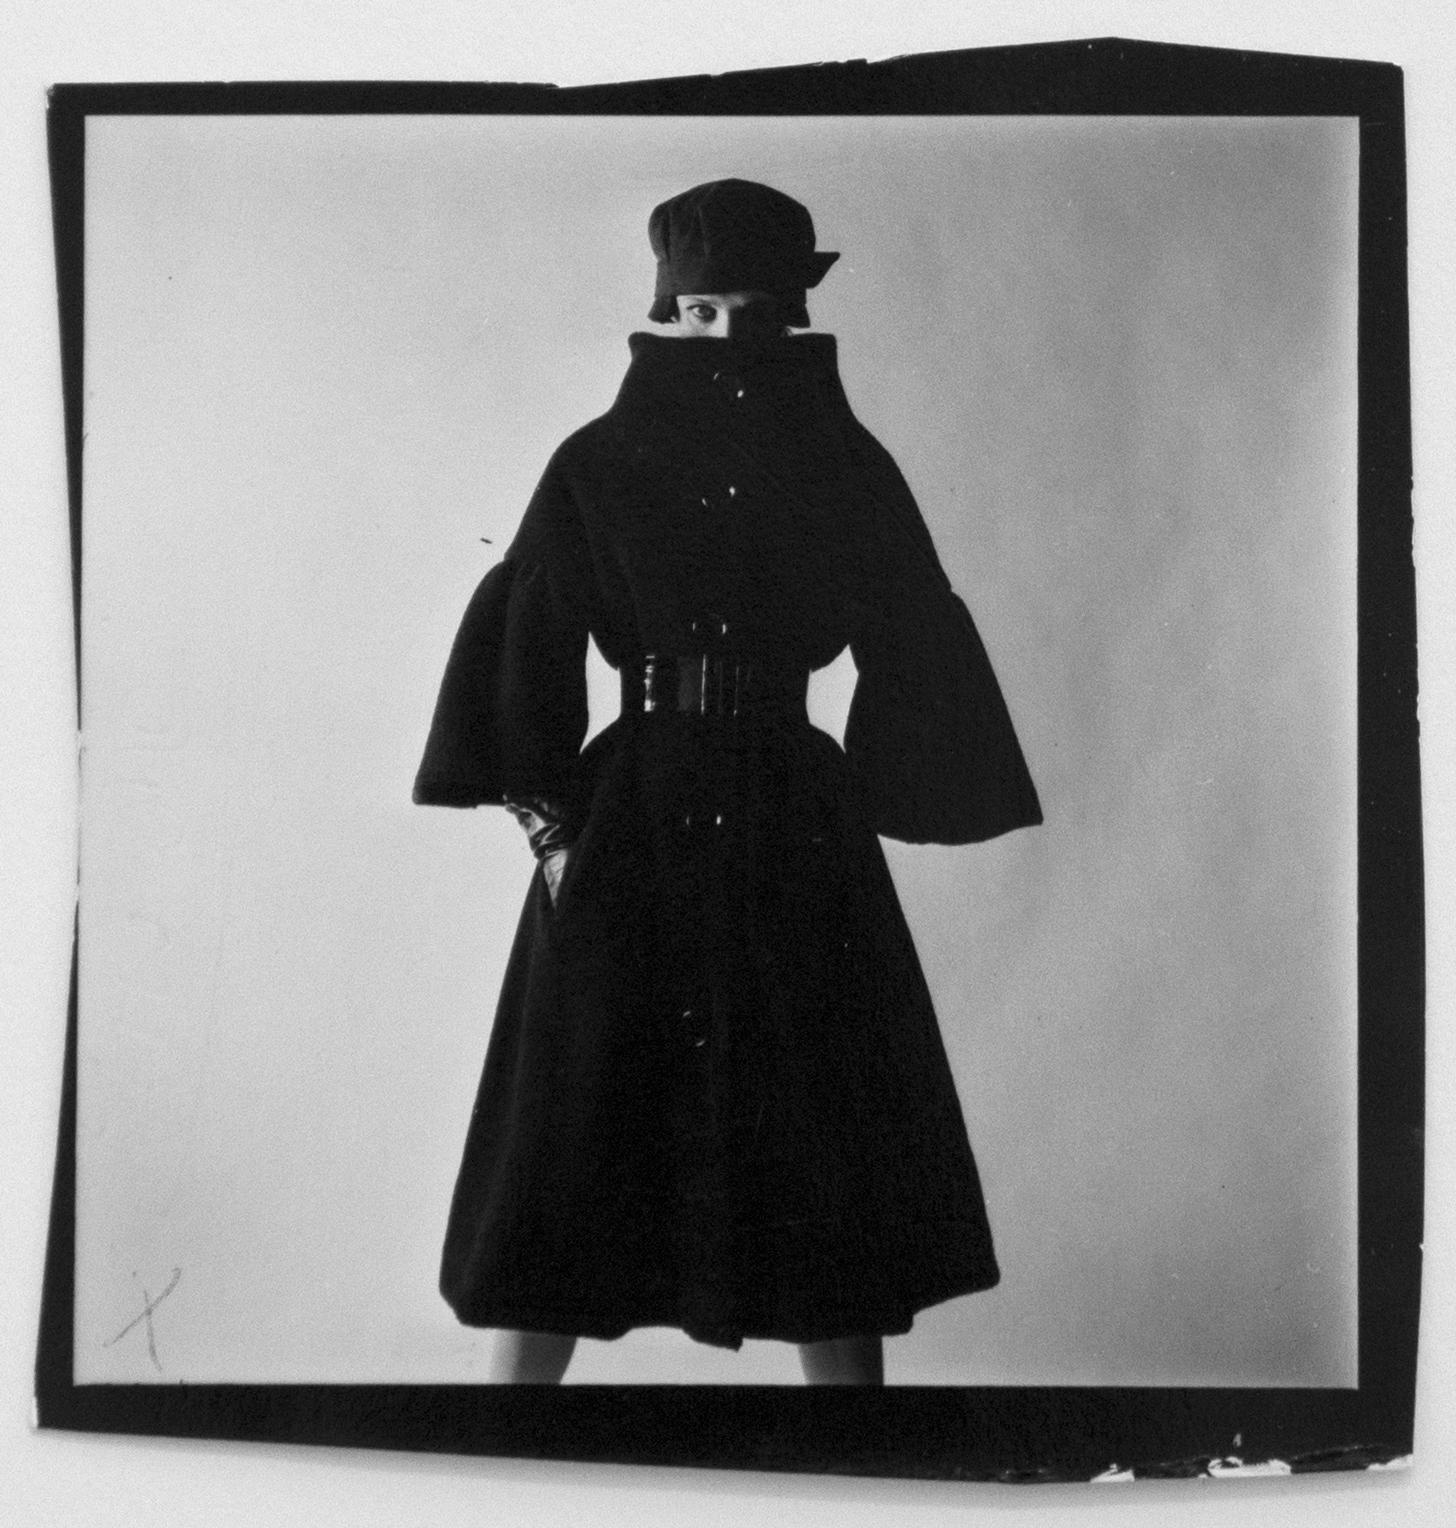 Terence Donovan Black and White Photograph - Viriginia Wynn-Thomas Wearing a Ronald Paterson Coat, 18 August 1959